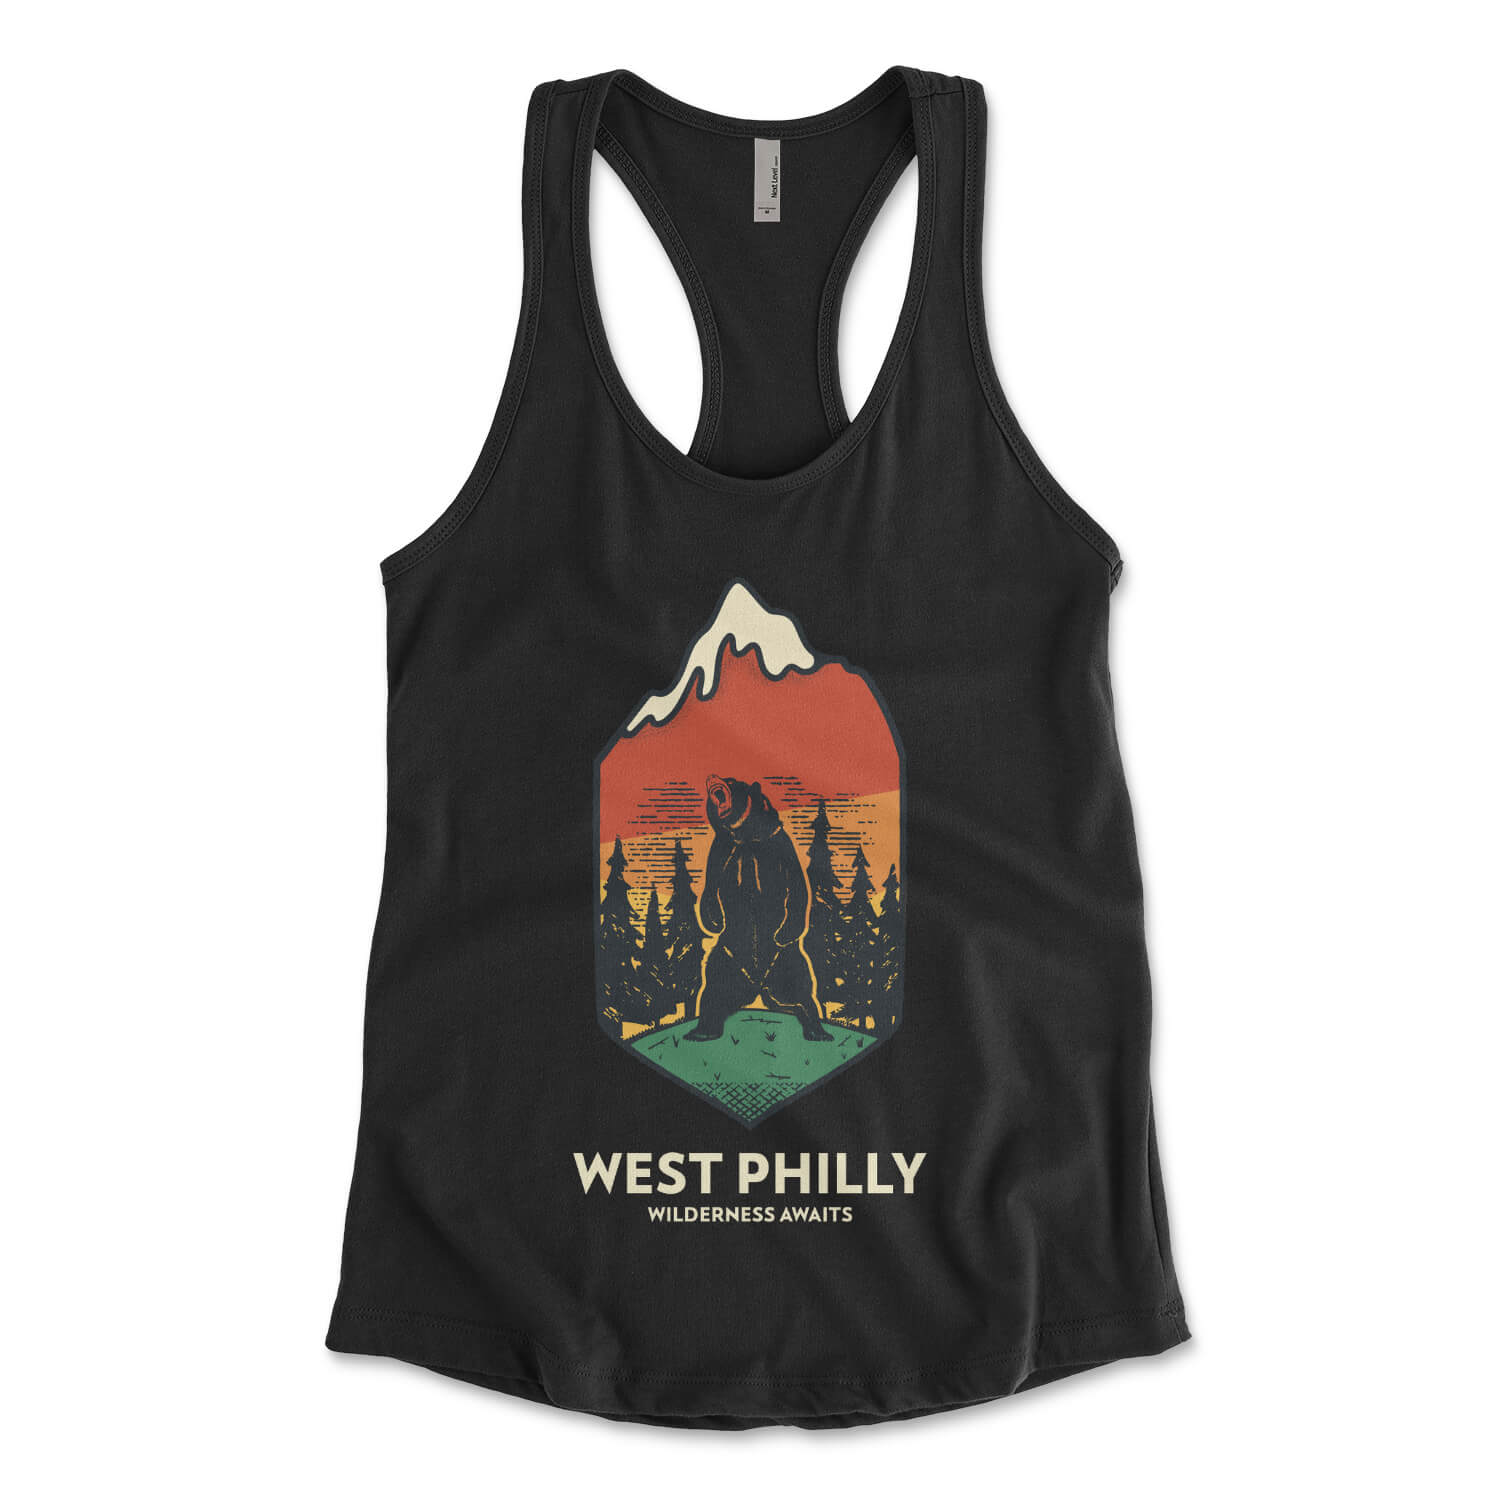 West Philadelphia wilderness awaits bear in the west philly wild on a womens black racerback tank top from Phillygoat